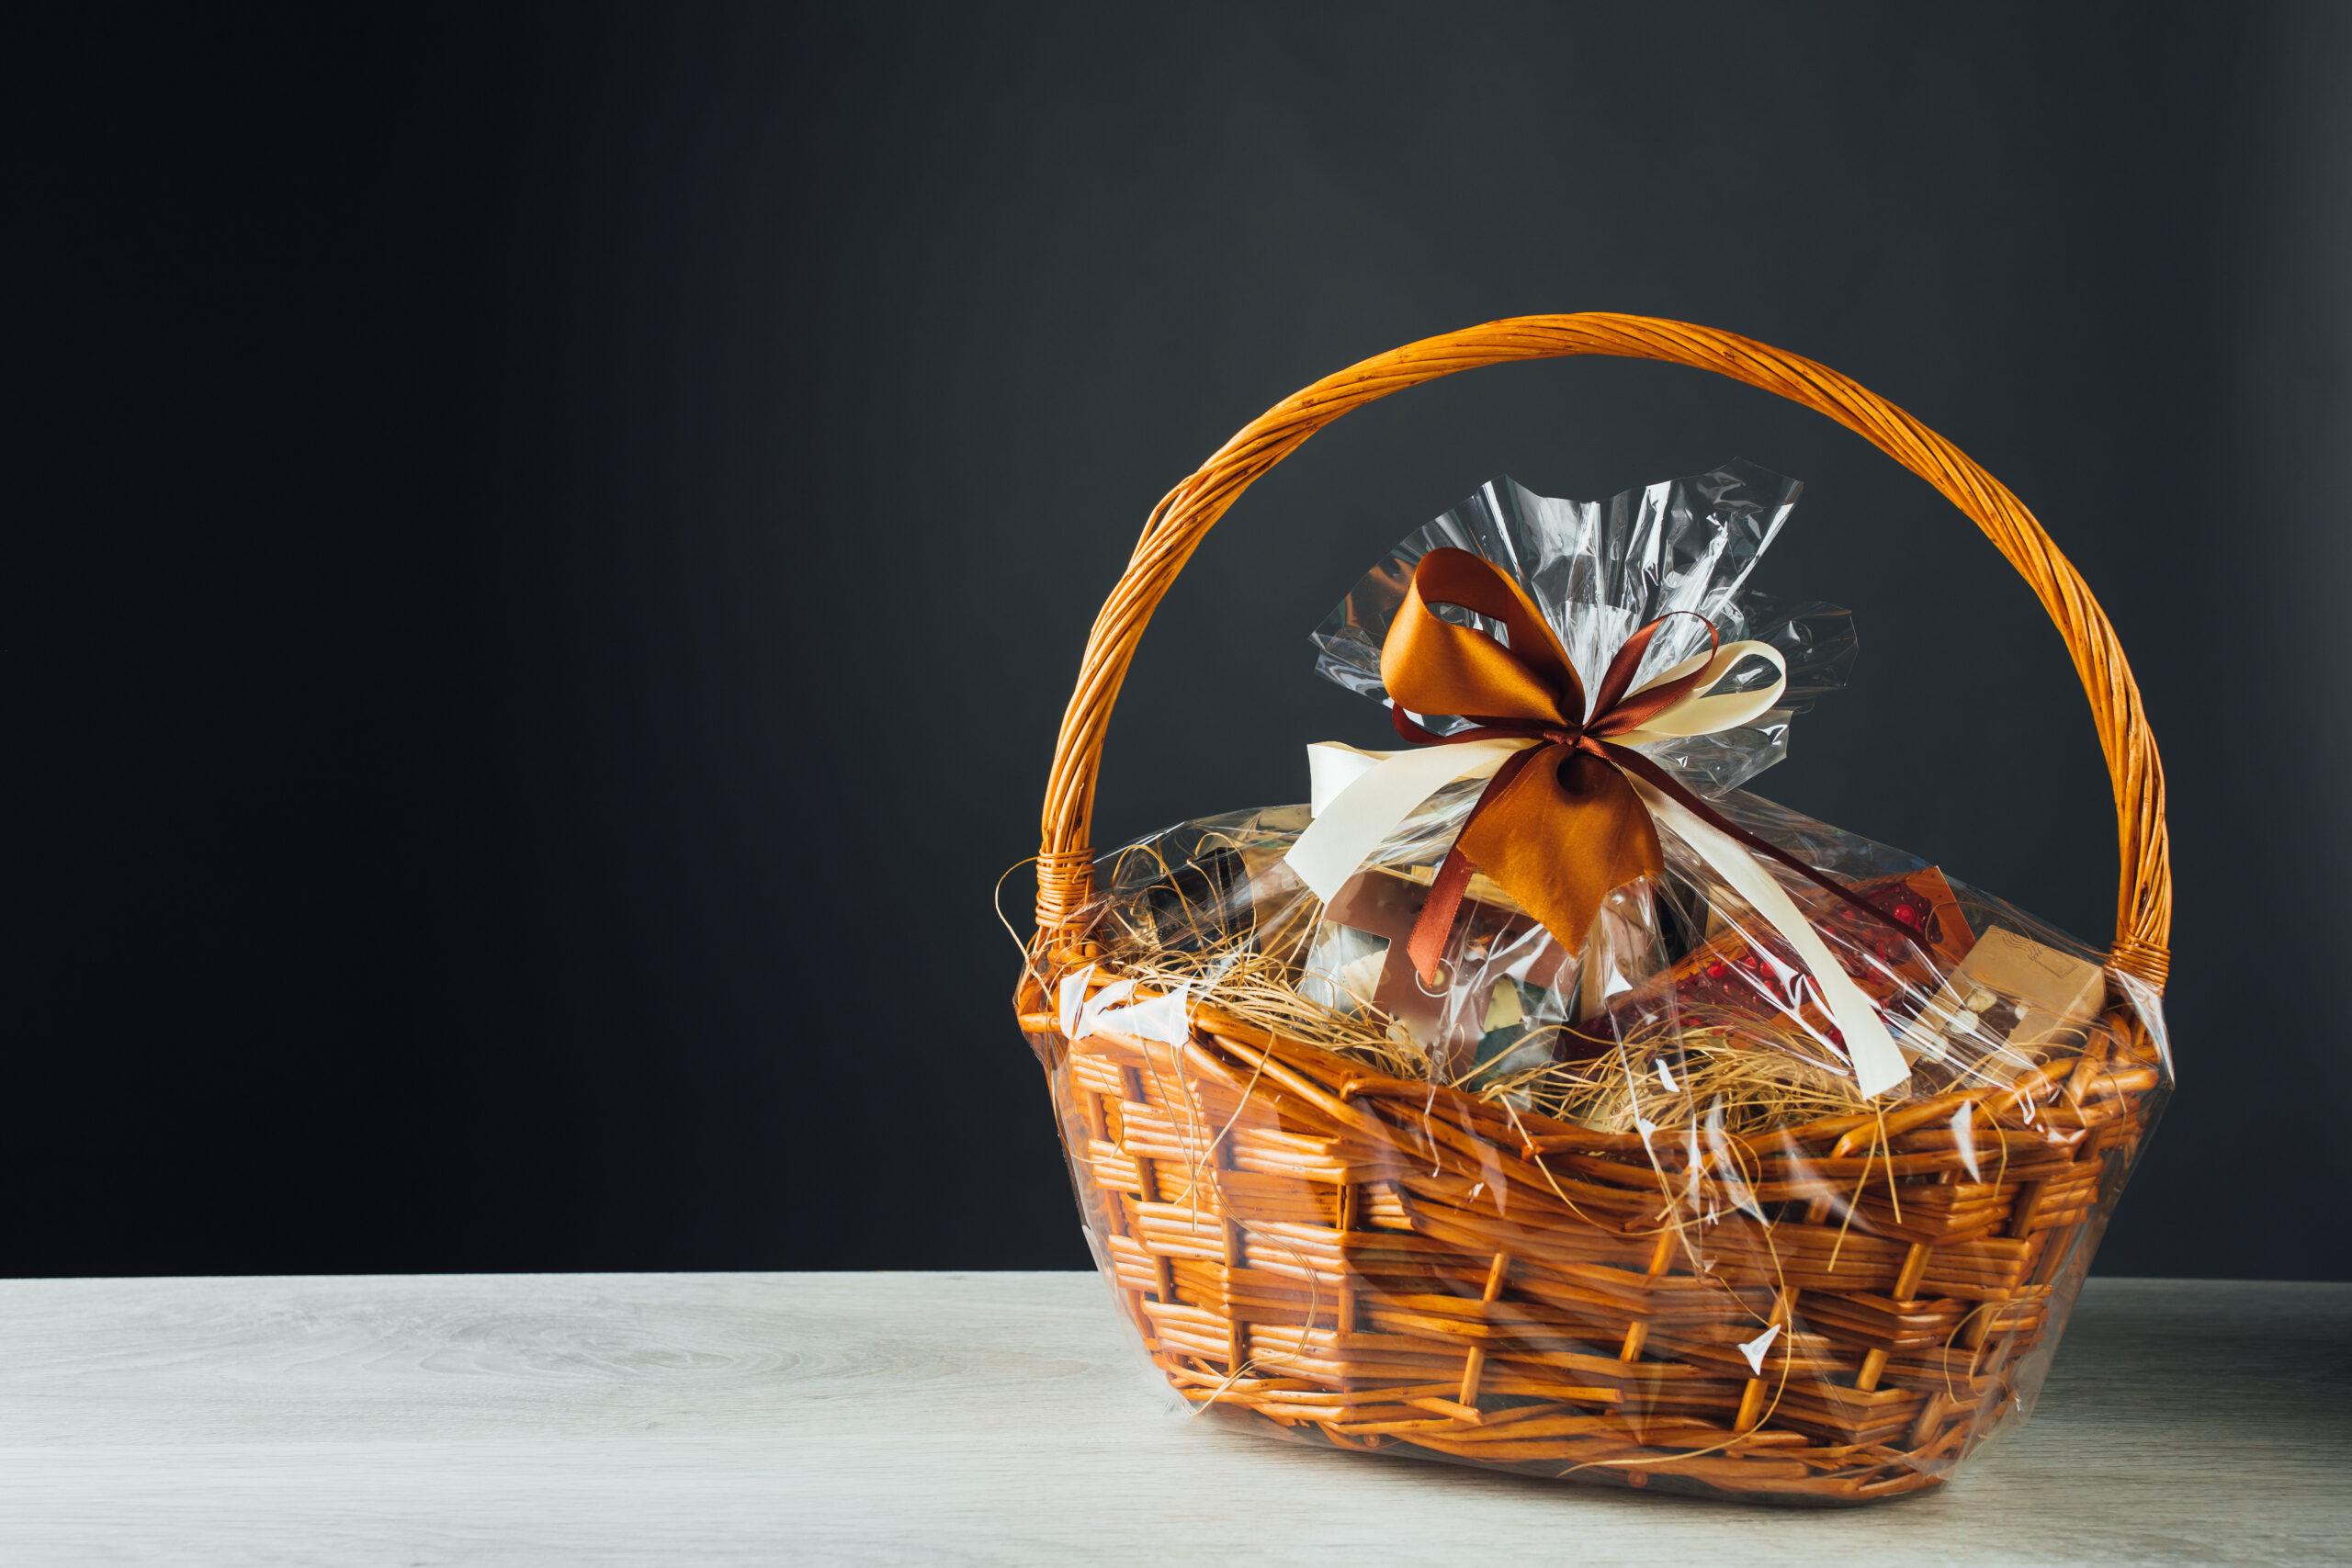 8 Tips to Make Your Raffle Baskets More Appealing - BetterWorld